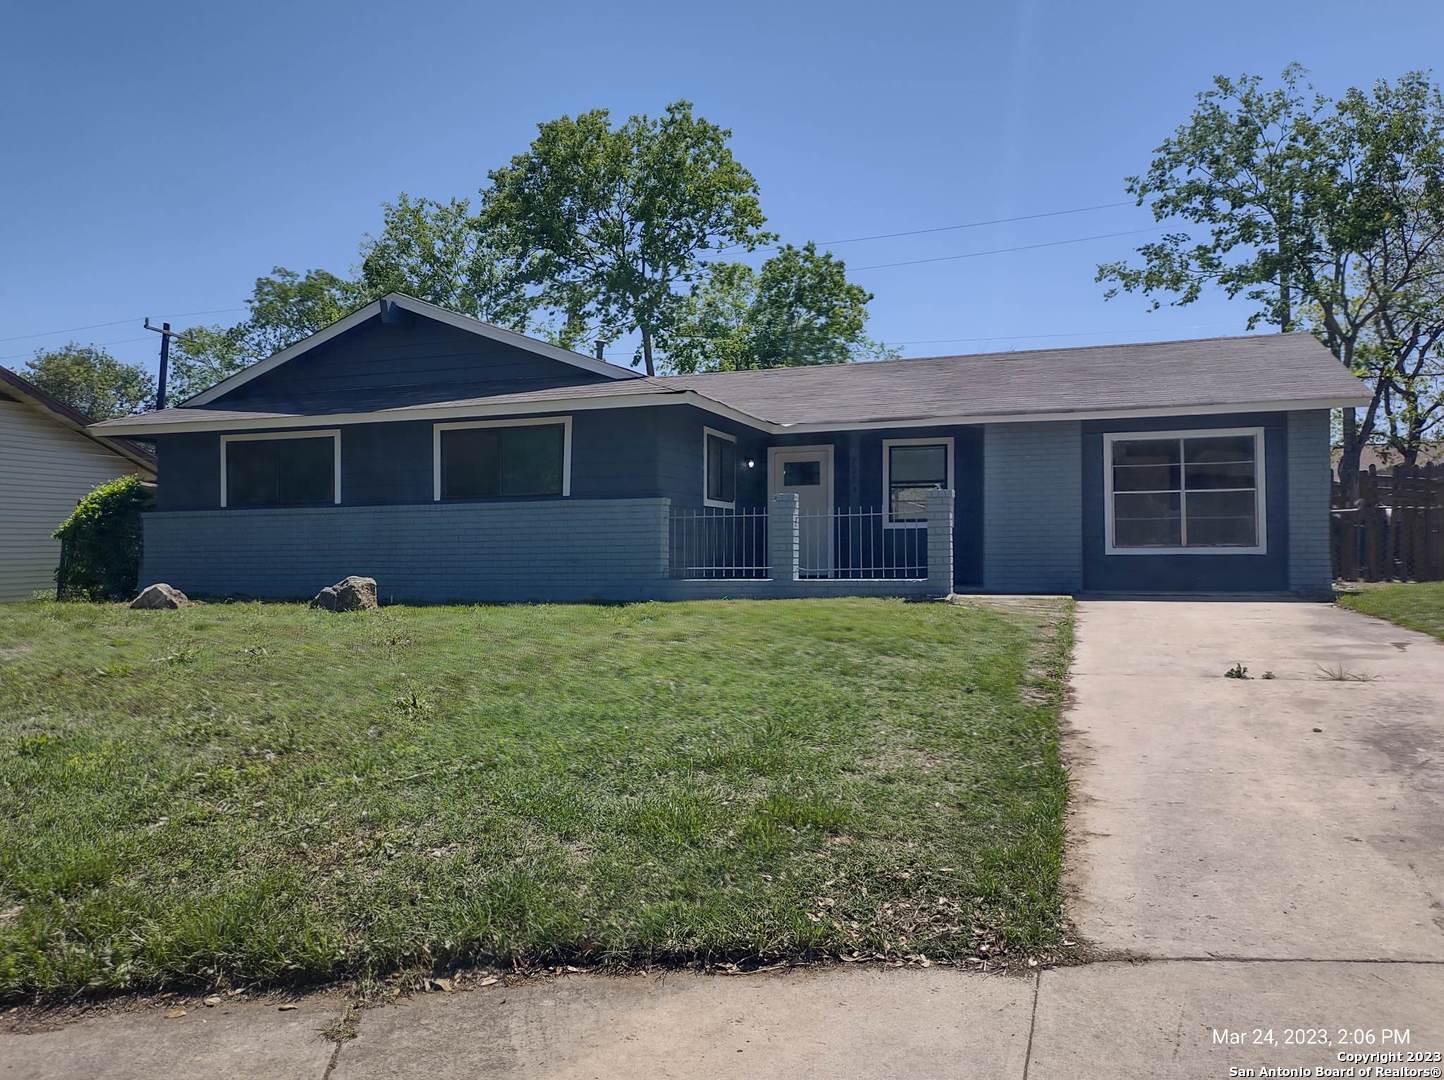 COME CHECK OUT THIS BEAUTIFUL 4 BEDROOM 2 BATHROOM HOME!! READY FOR YOU TO MAKE IT YOUR OWN!! GREAT LOCATION ON A CUL-DE-SAC NEARBY SHOPPING CENTER'S. SCHEDULE A SHOWING TODAY!!!